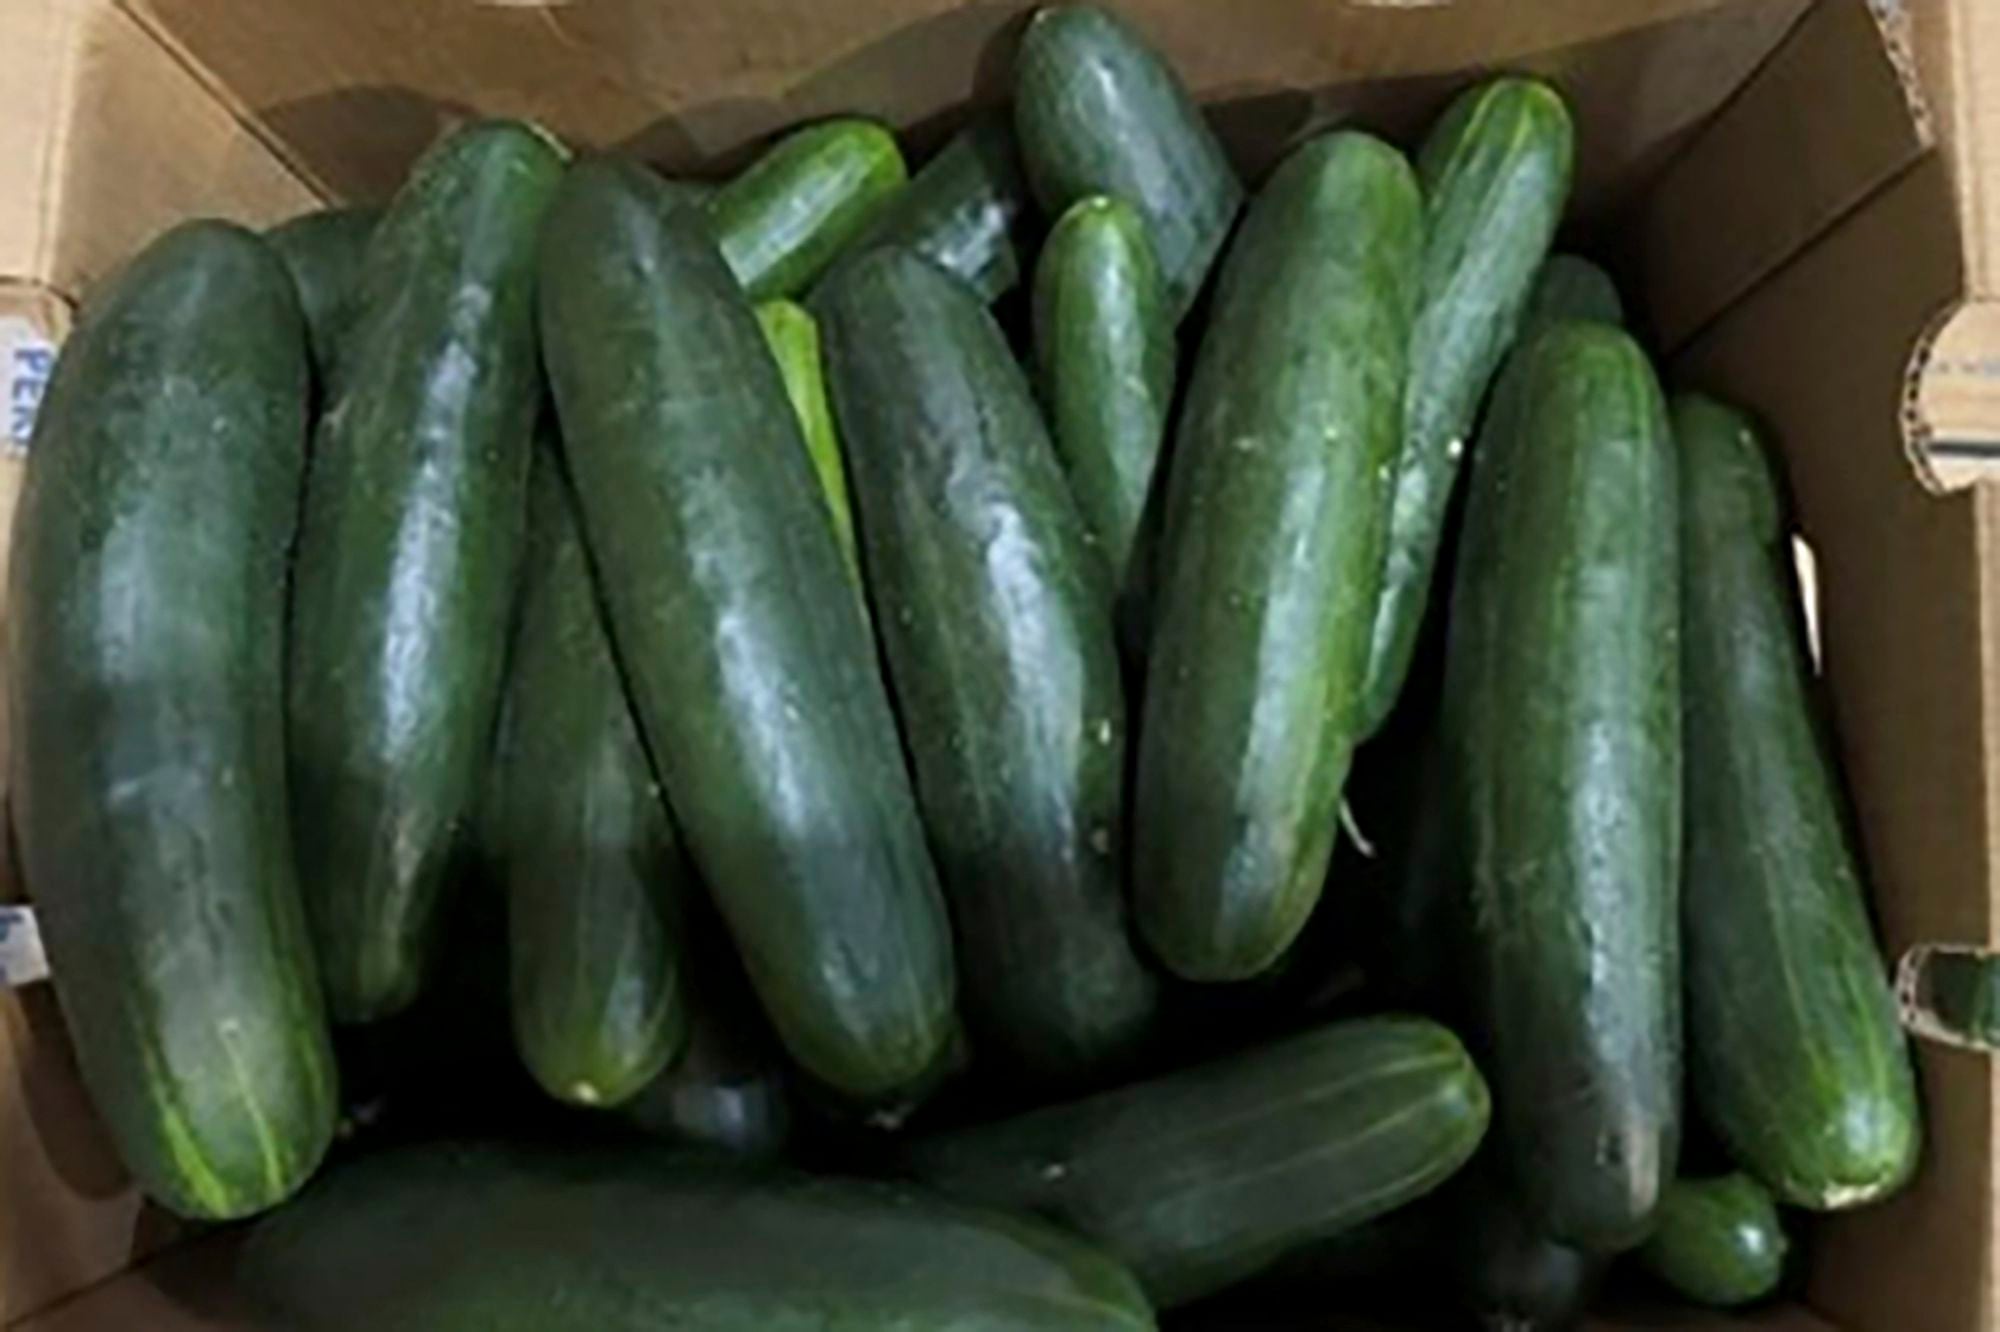 Untreated water used by Florida cucumber grower tied to salmonella outbreak that sickened 450 people in US thumbnail